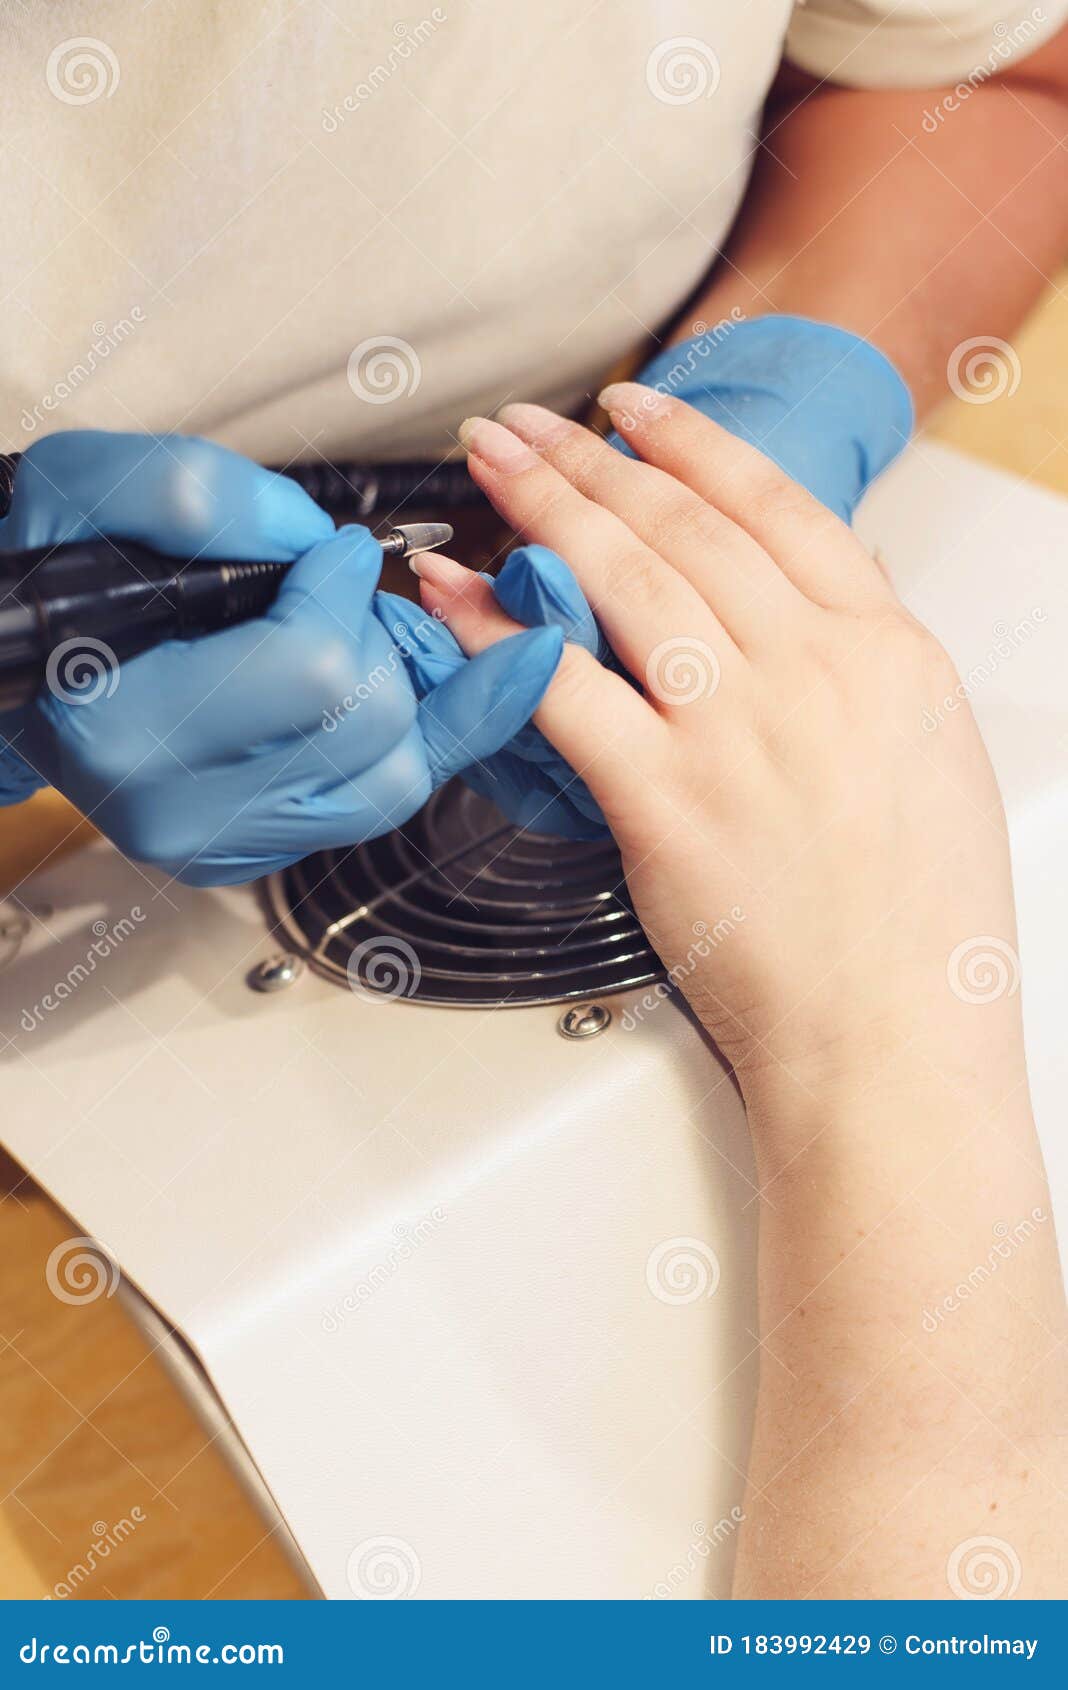 a girl is doing manicure. a girl is cutting nails